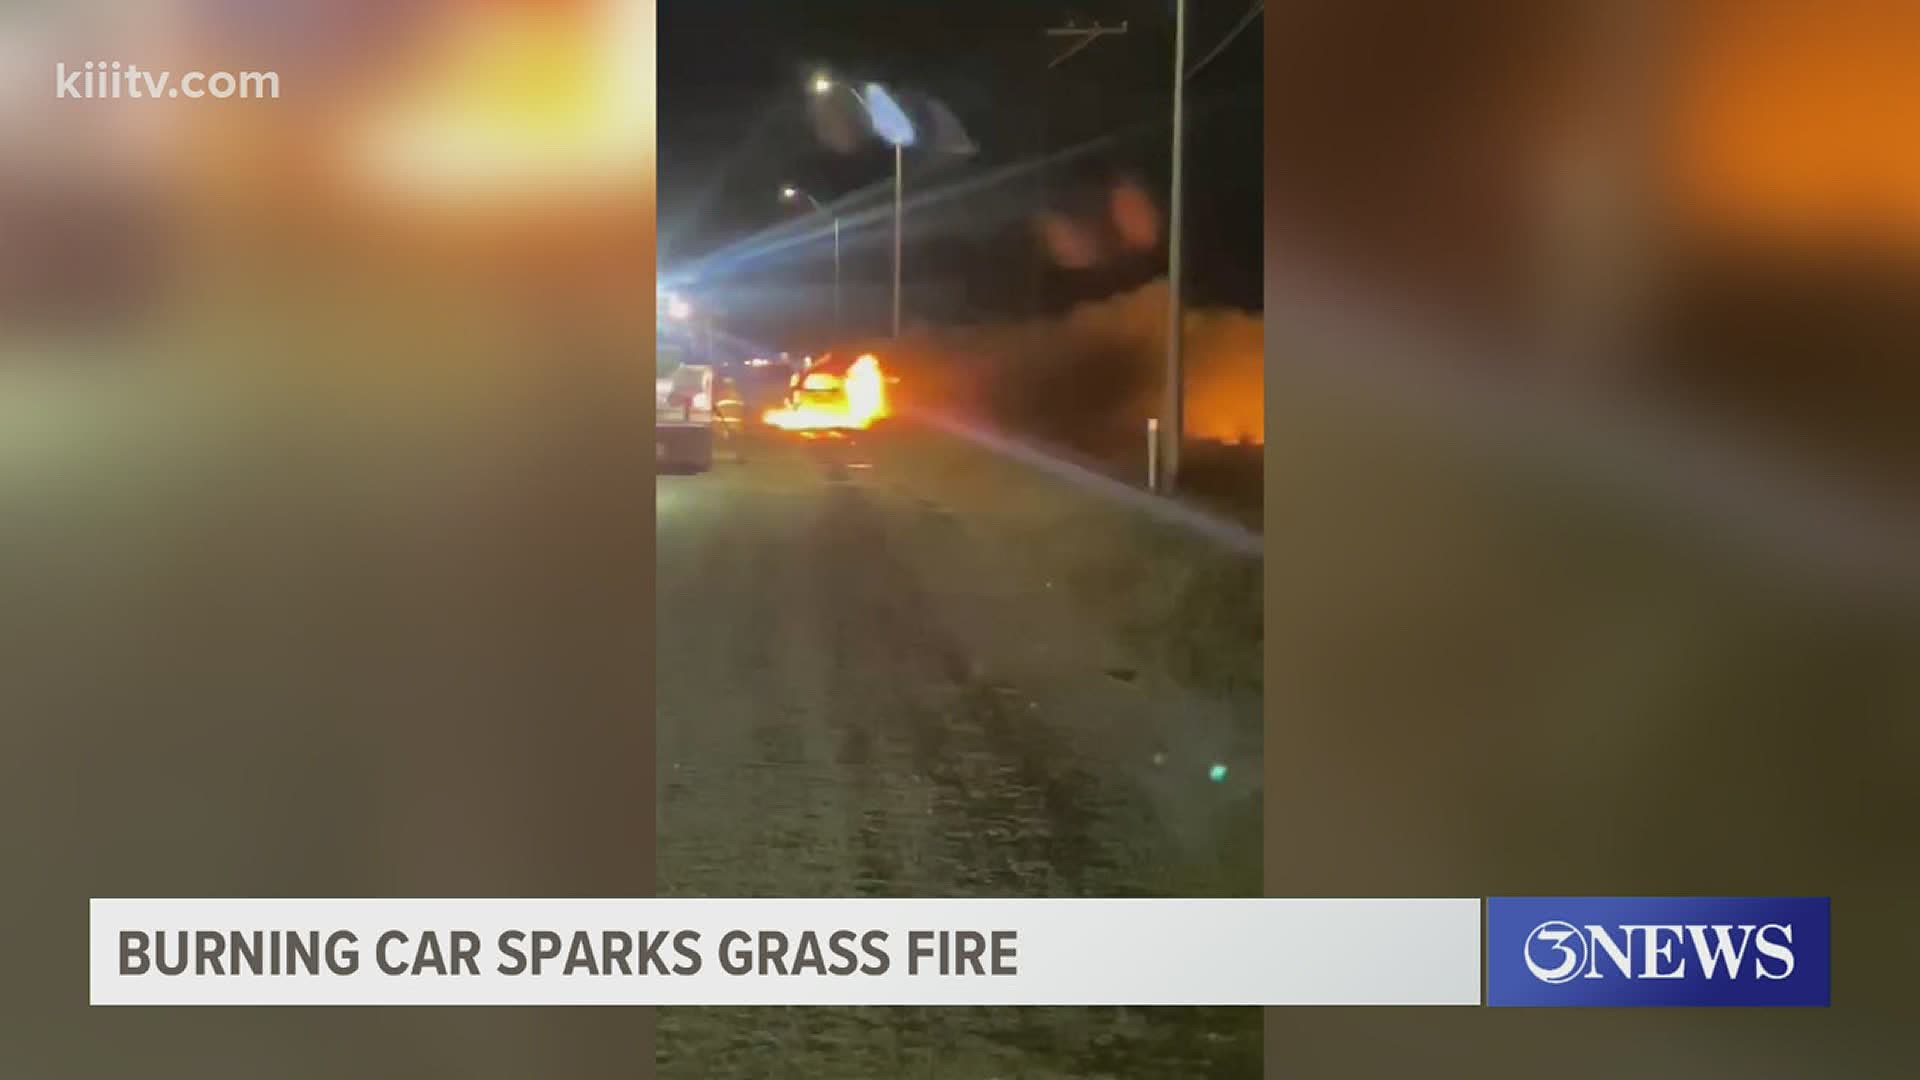 Authorities with the San Patricio Sherriff's Office said reports of fireworks inside the vehicle caused added concerns.